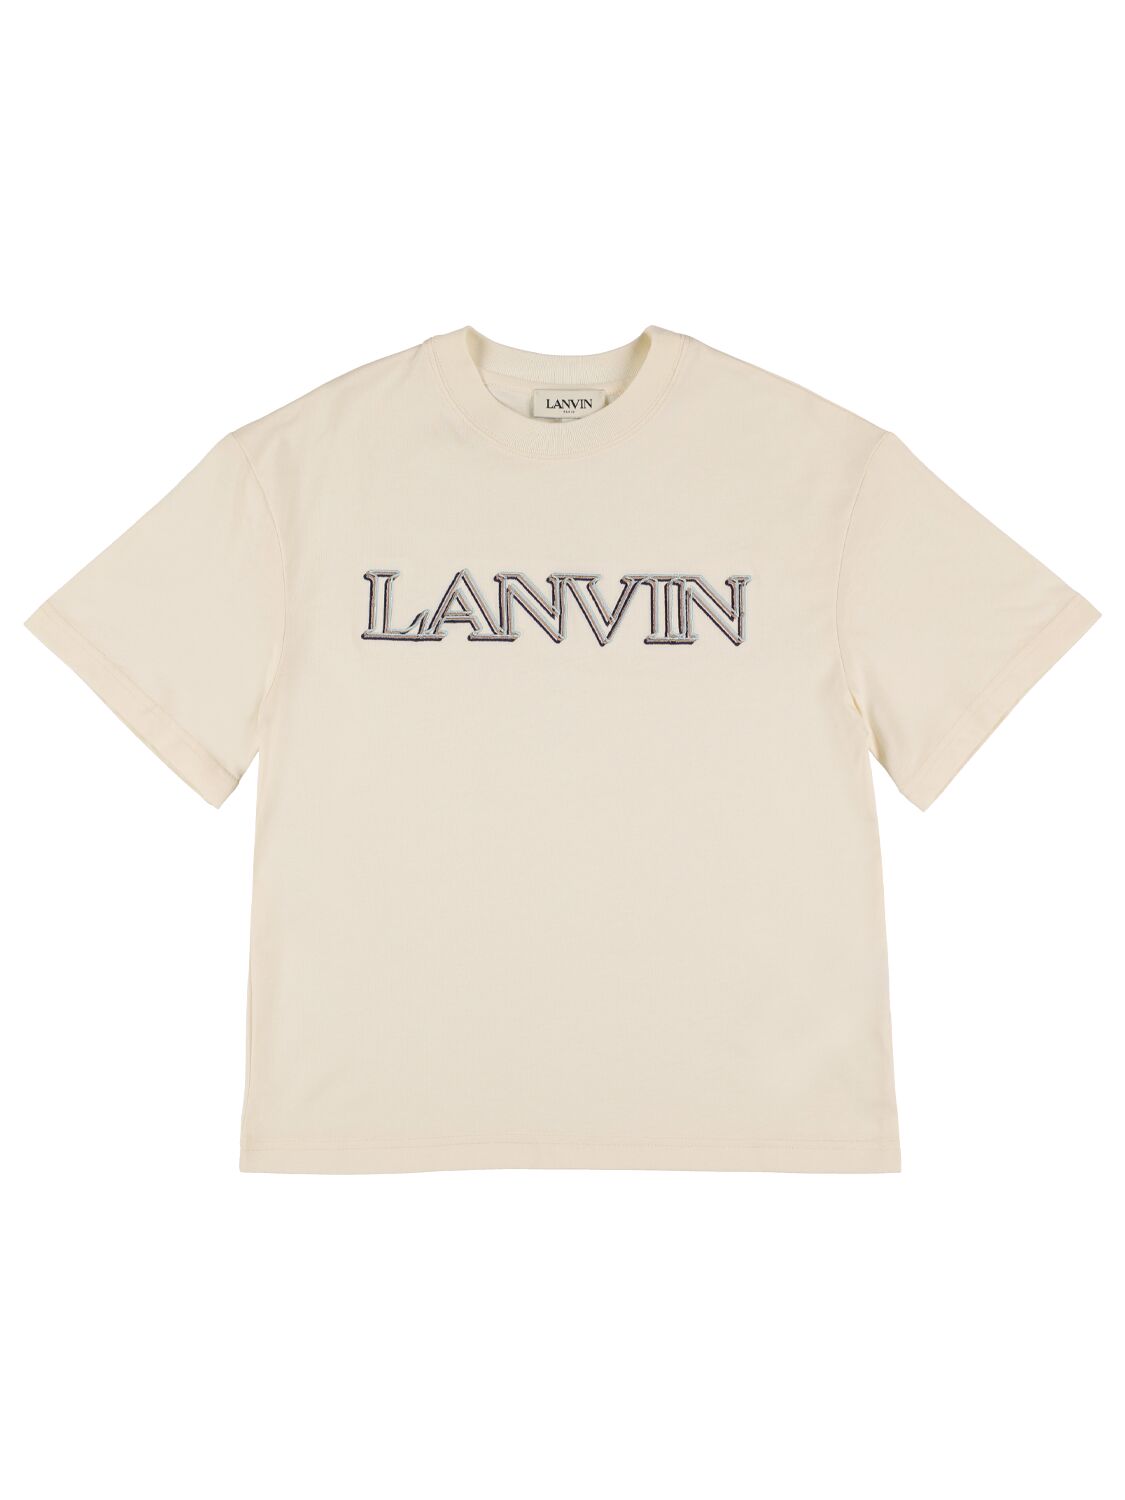 Lanvin Kids' Embroidered Logo Cotton Jersey T-shirt In Yellow